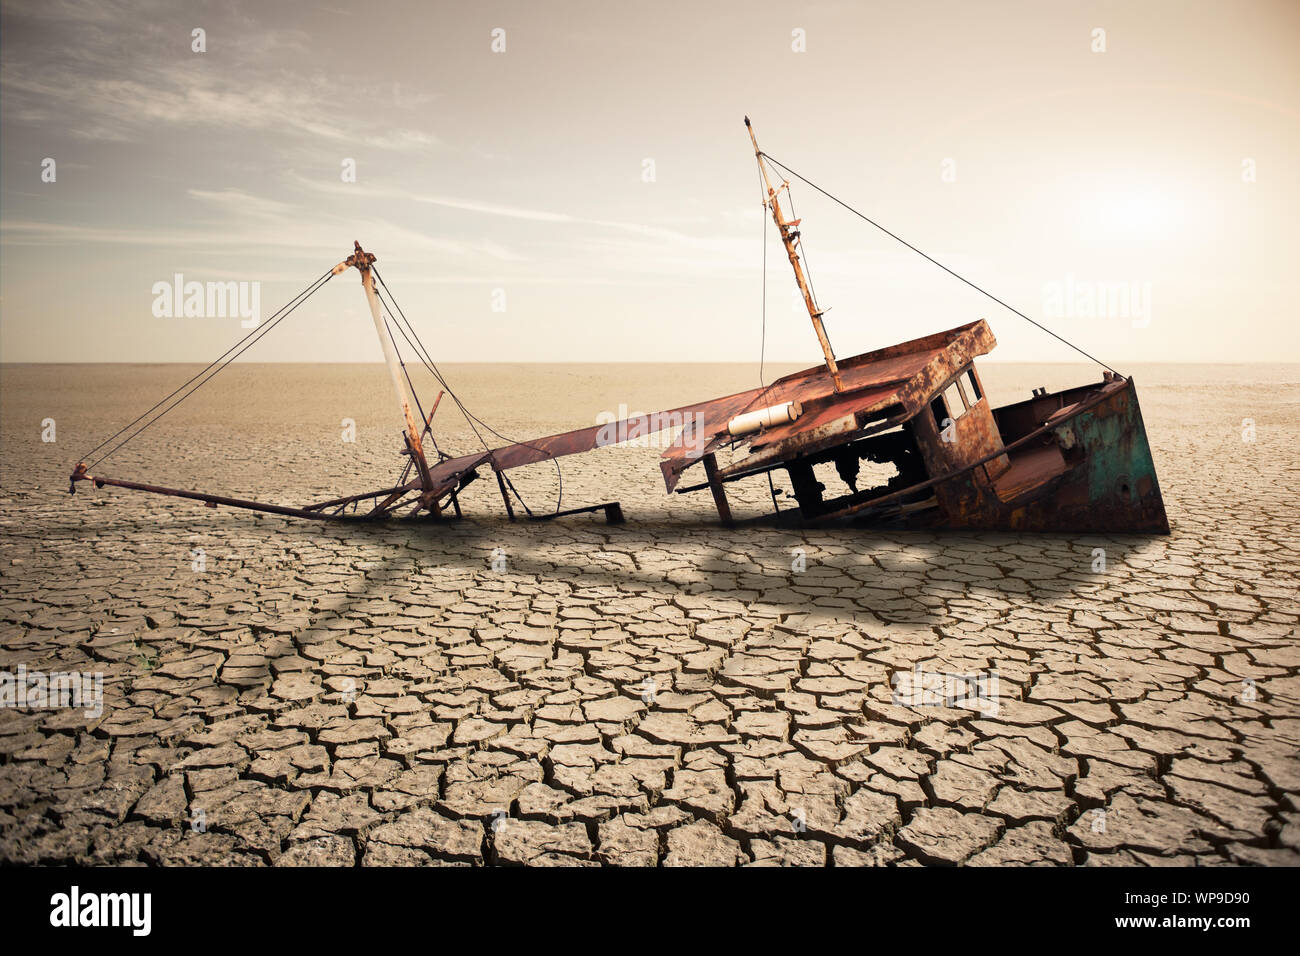 Rusty ship in a dried ocean. Concept of global warming and climate change Stock Photo